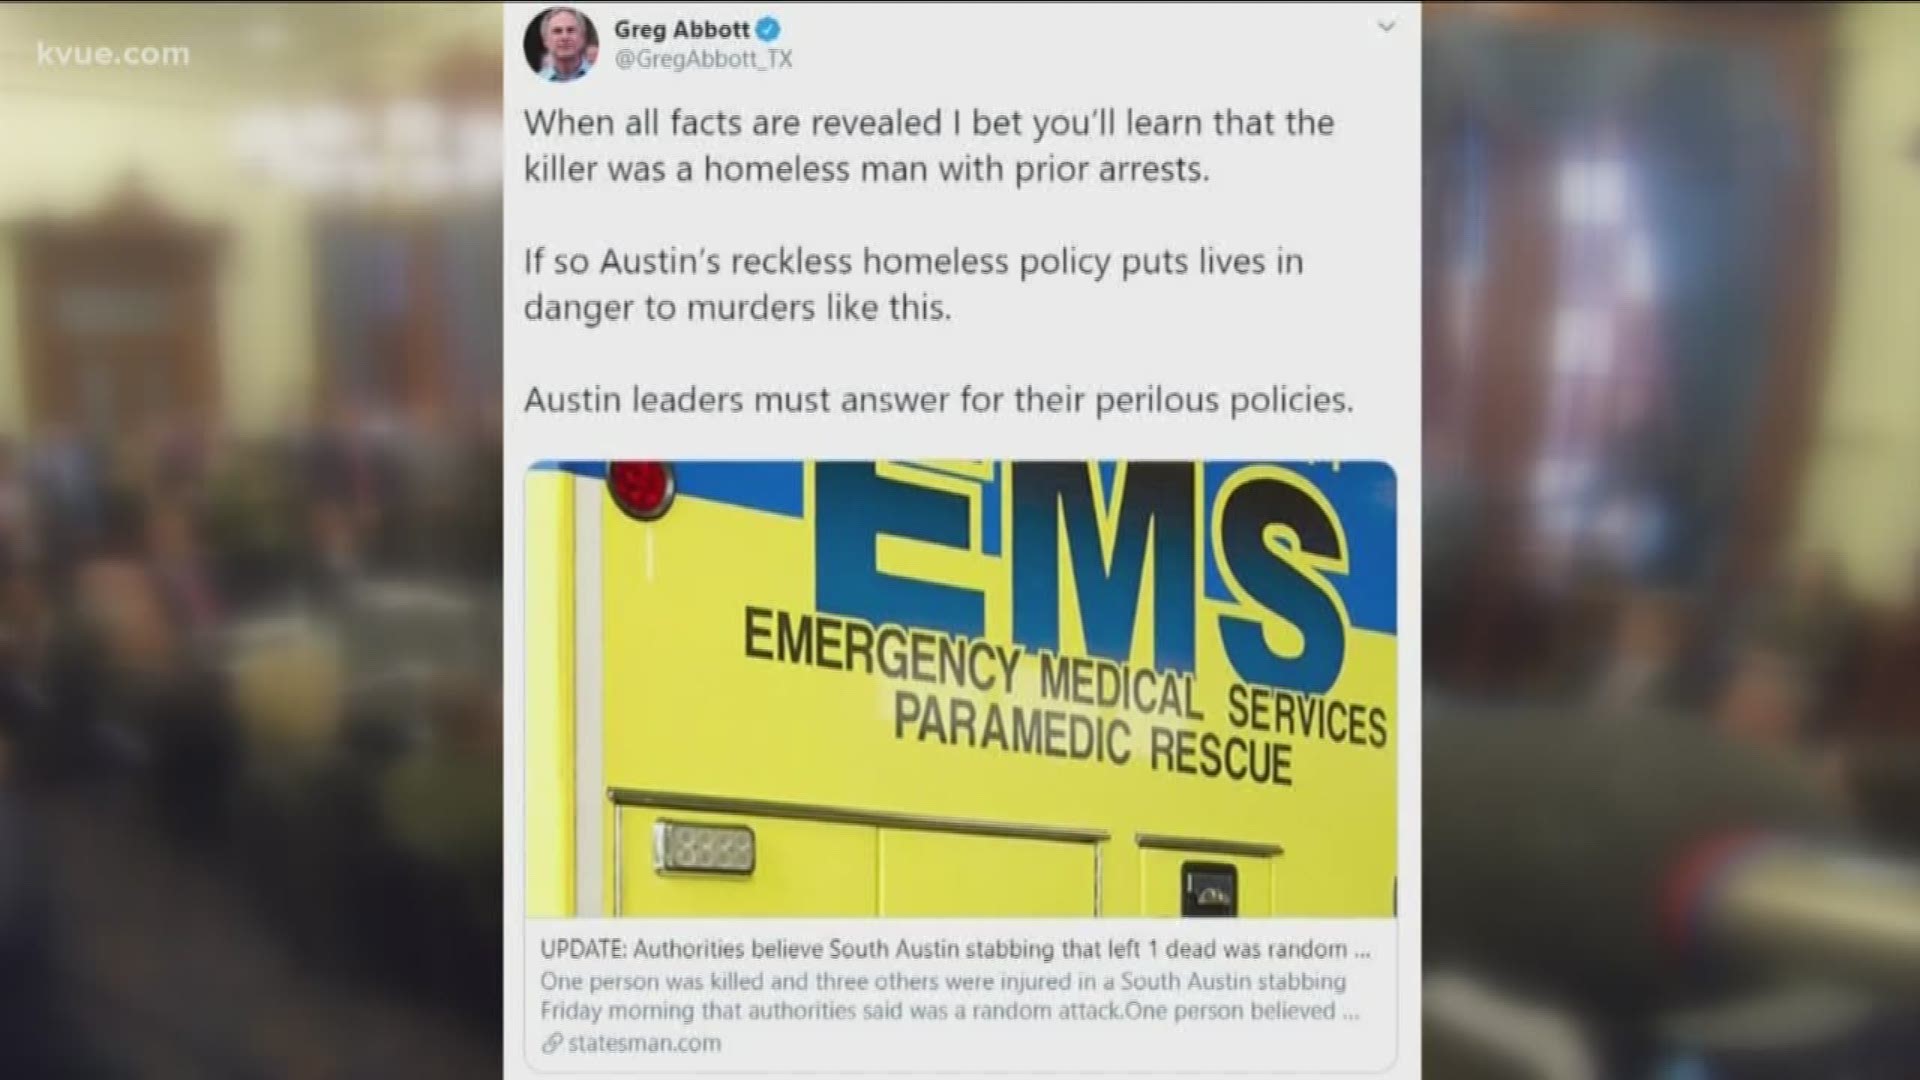 The governor had harsh criticism for the City of Austin, saying its homeless policy is leading to an increase in crime.